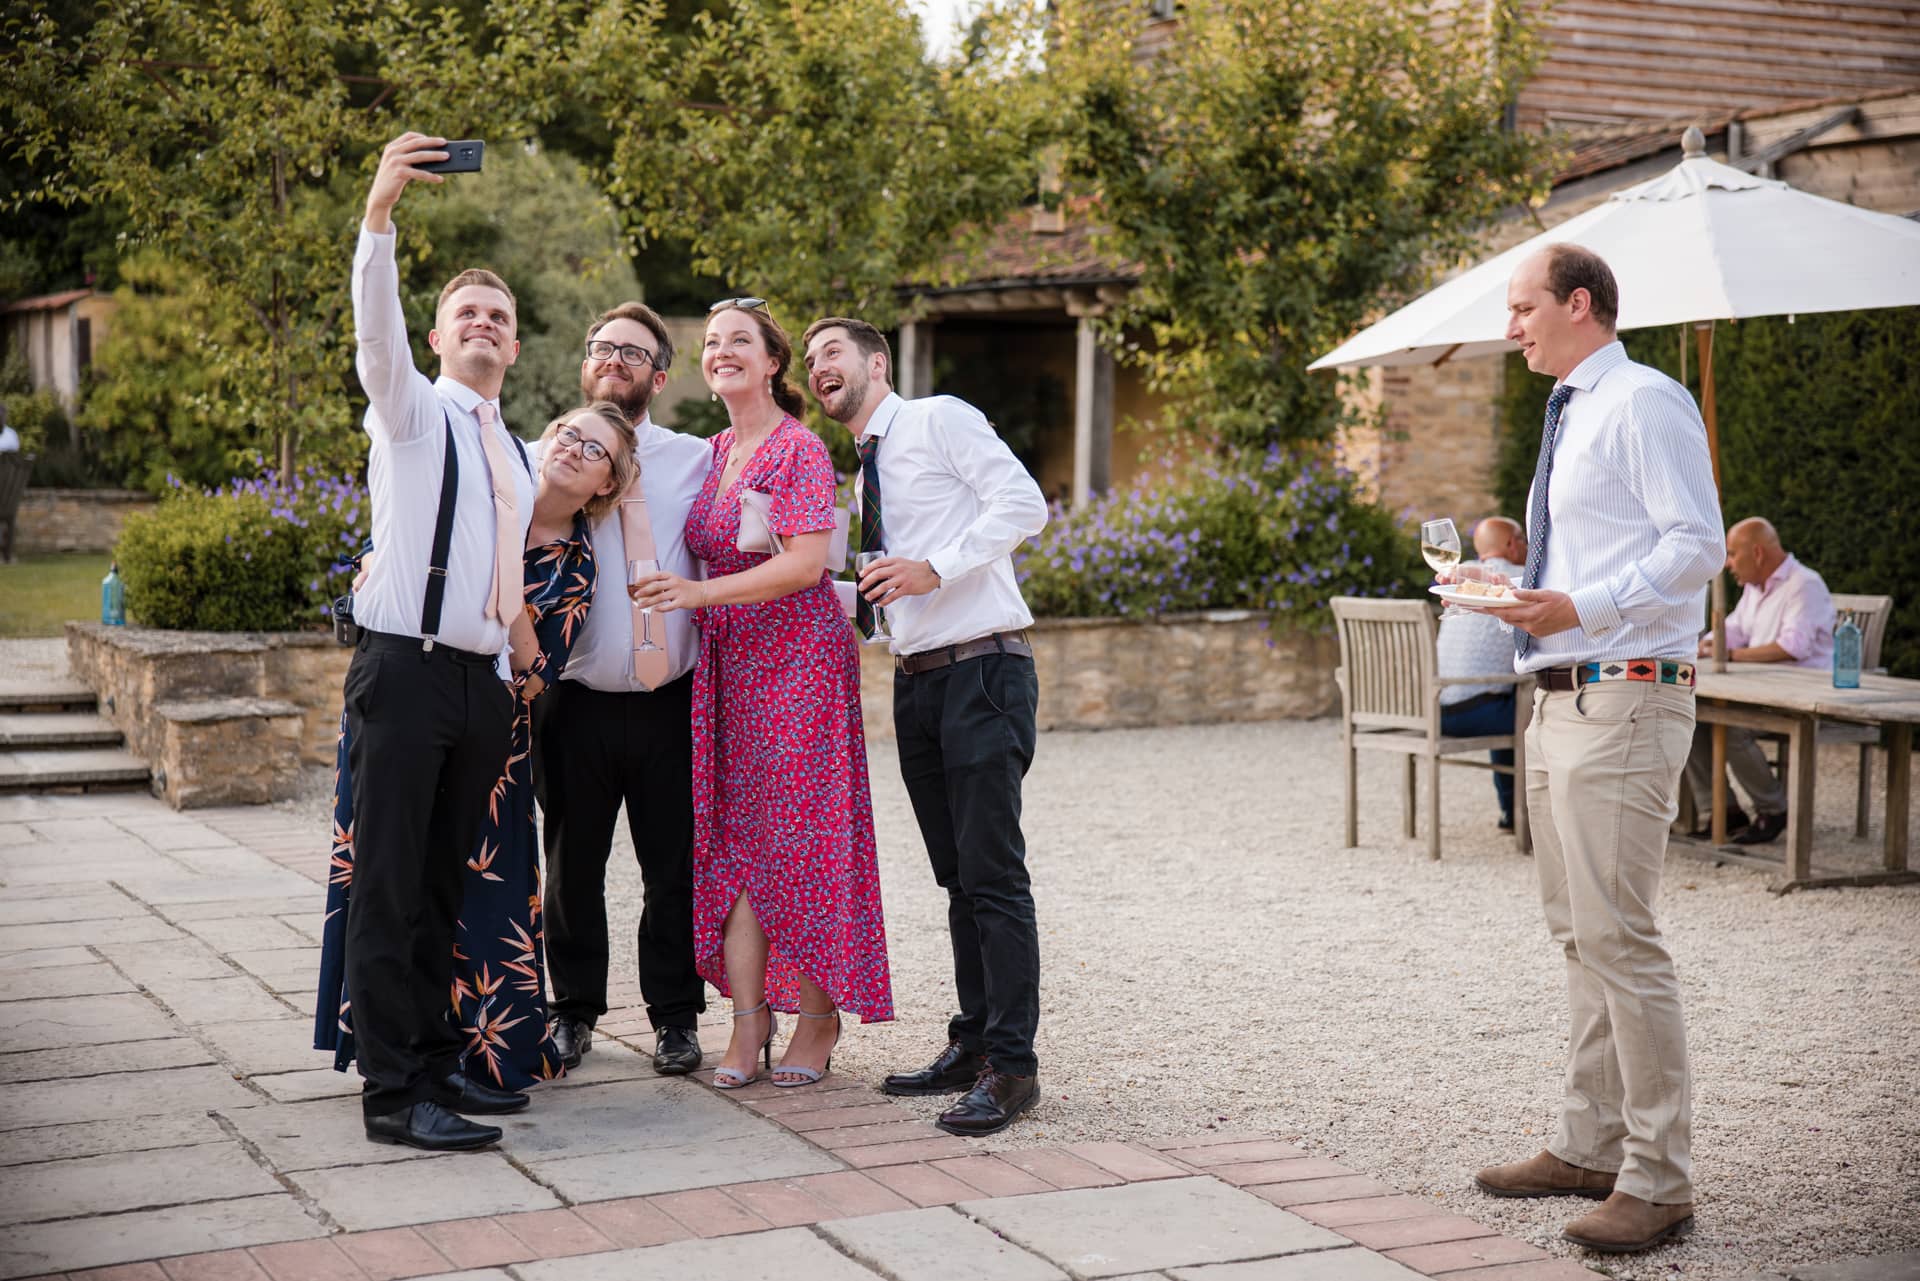 Guests taking a selfie at Oxleaze Barn Wedding